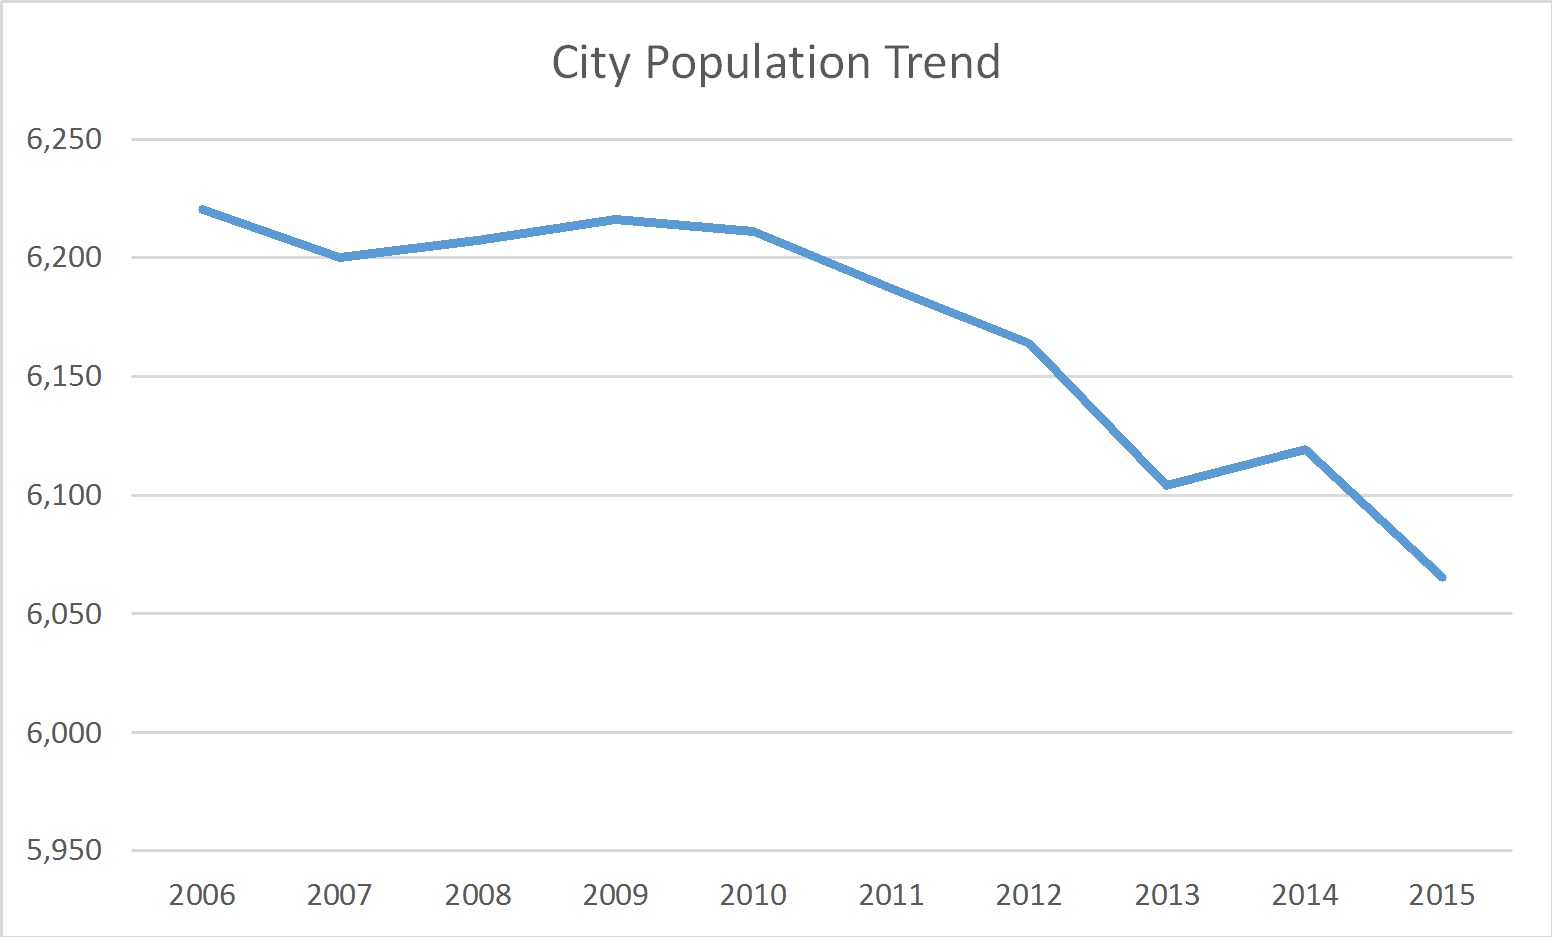 population of rochester ny 2022